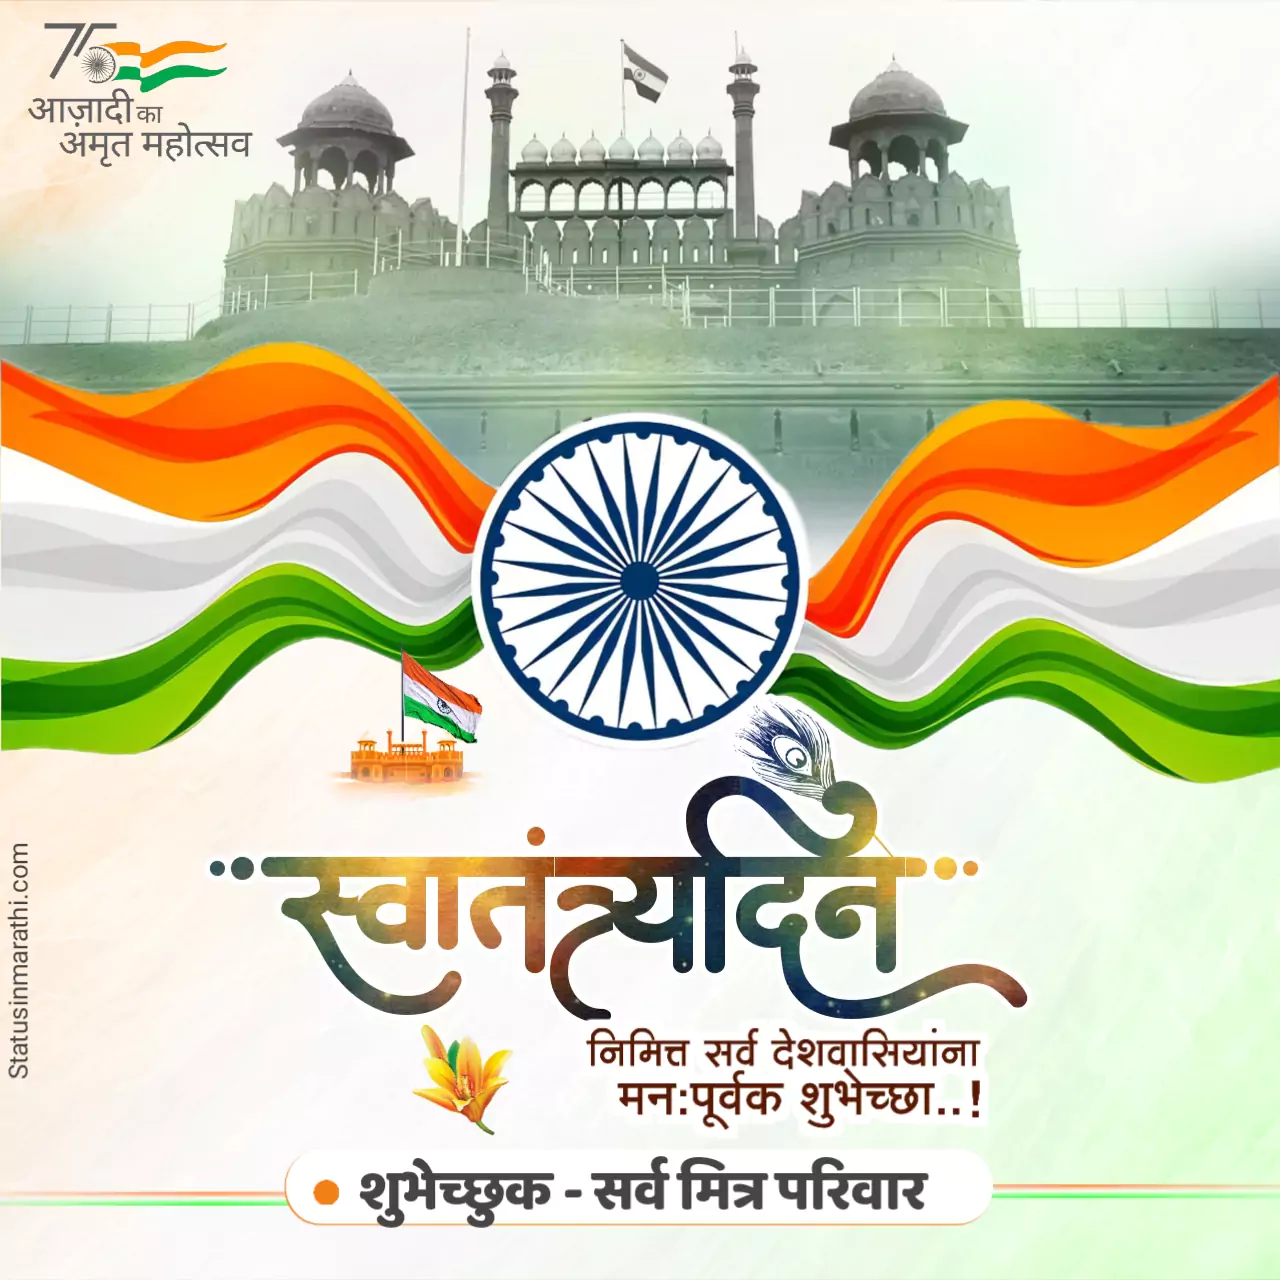 Happy Independence day images in marathi